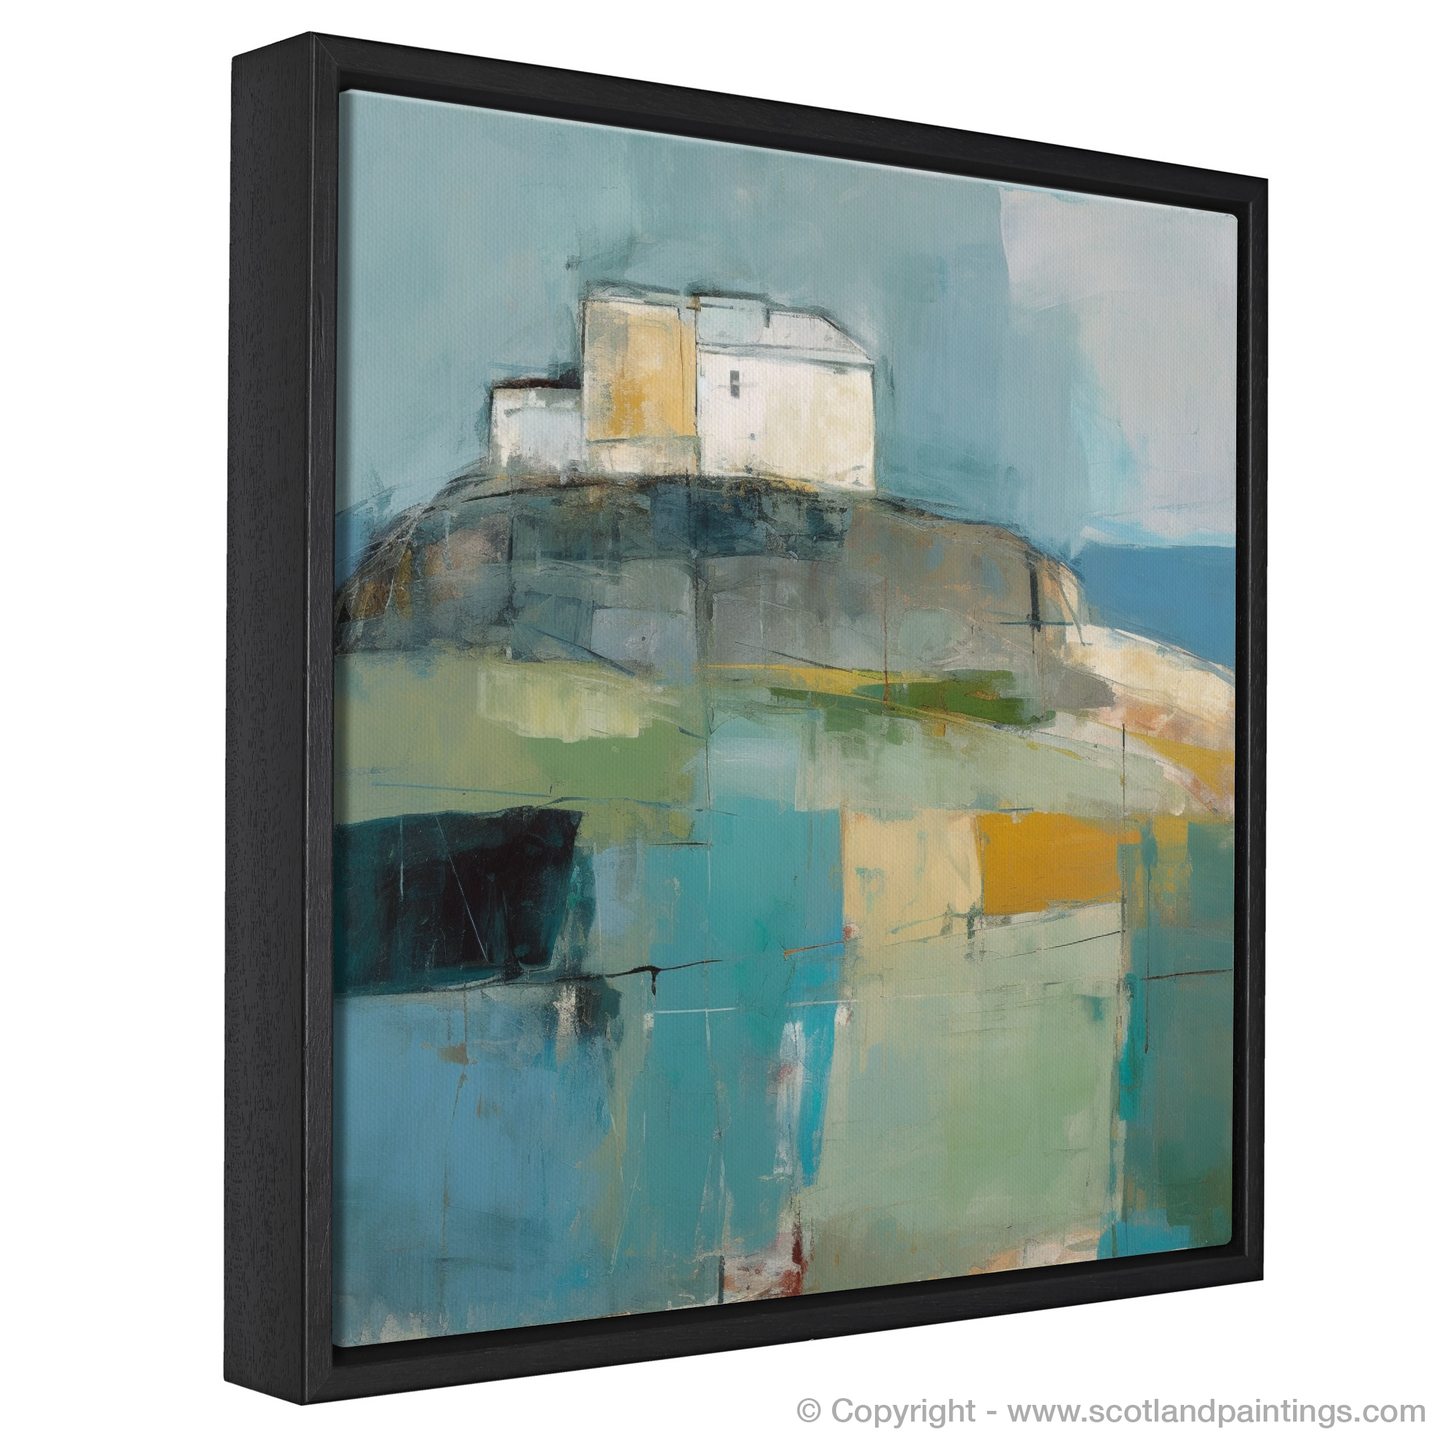 Castle Tioram Reimagined: An Abstract Impressionist Journey